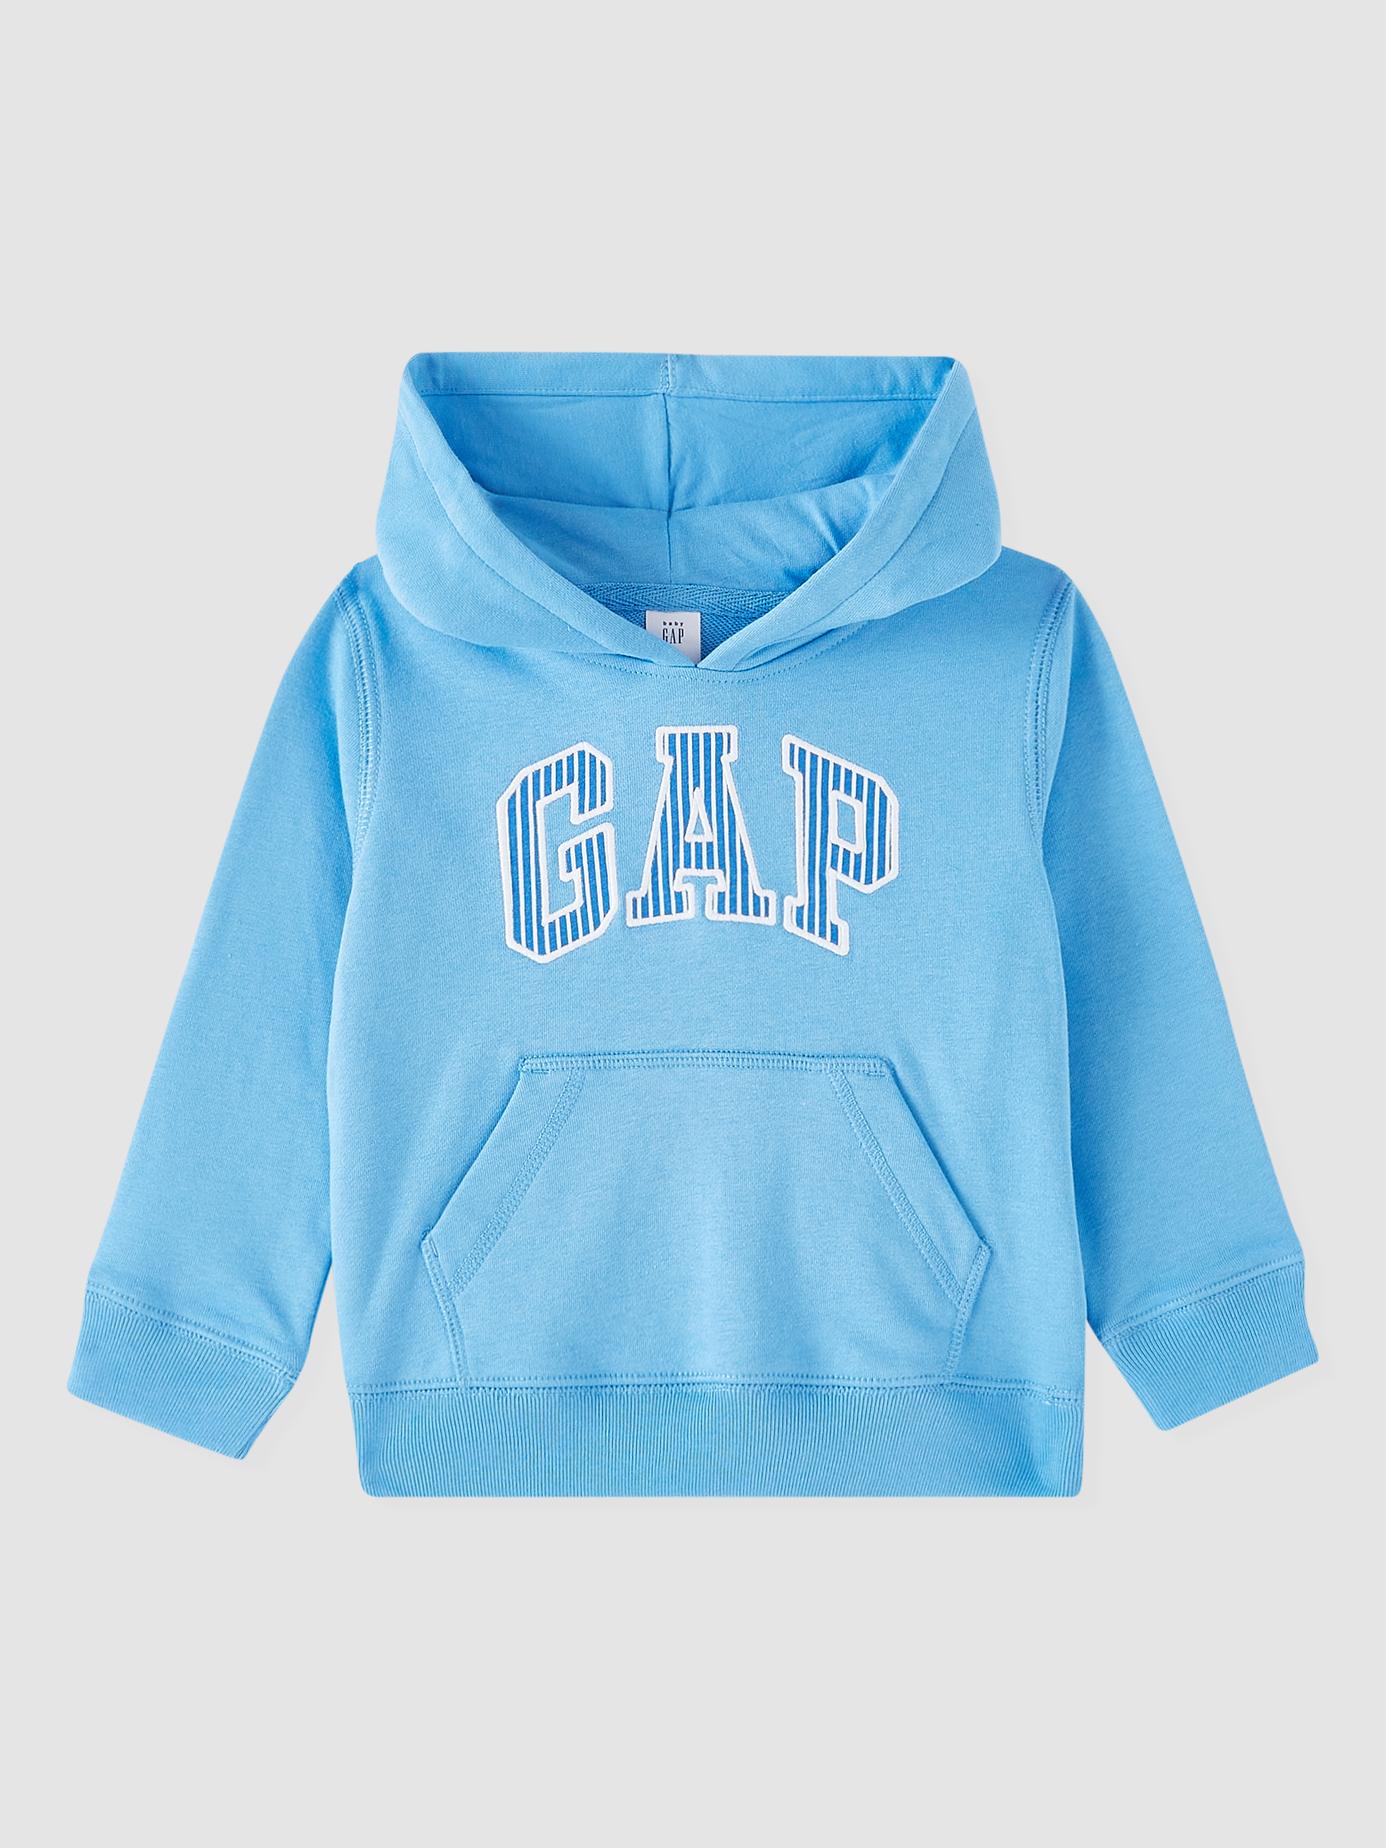 Kids Gap Arch Logo Hoodie offers at 77 Dhs in Gap